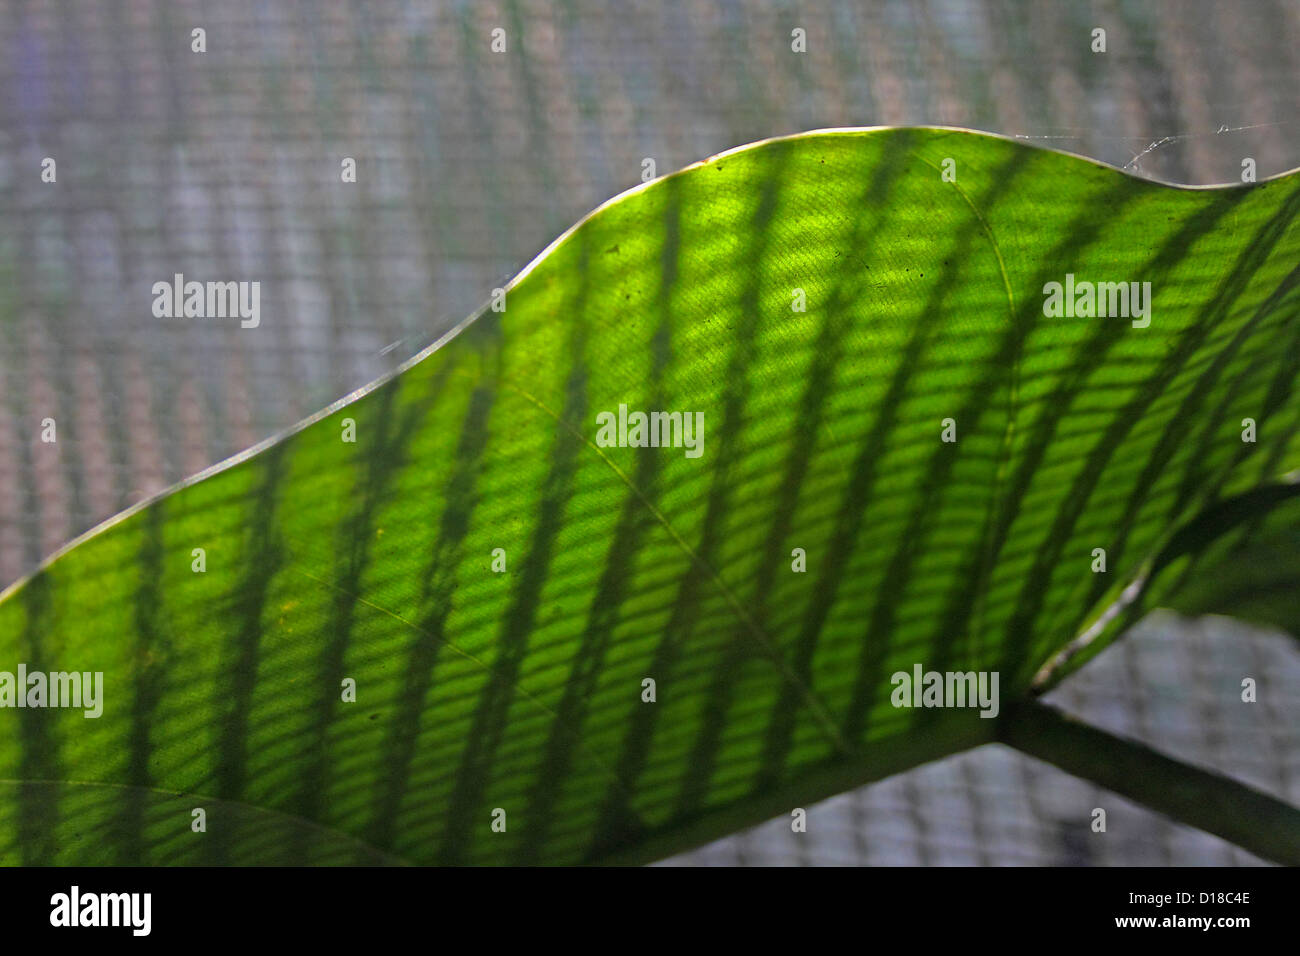 Light pattern on Leaf of Canna indica Stock Photo